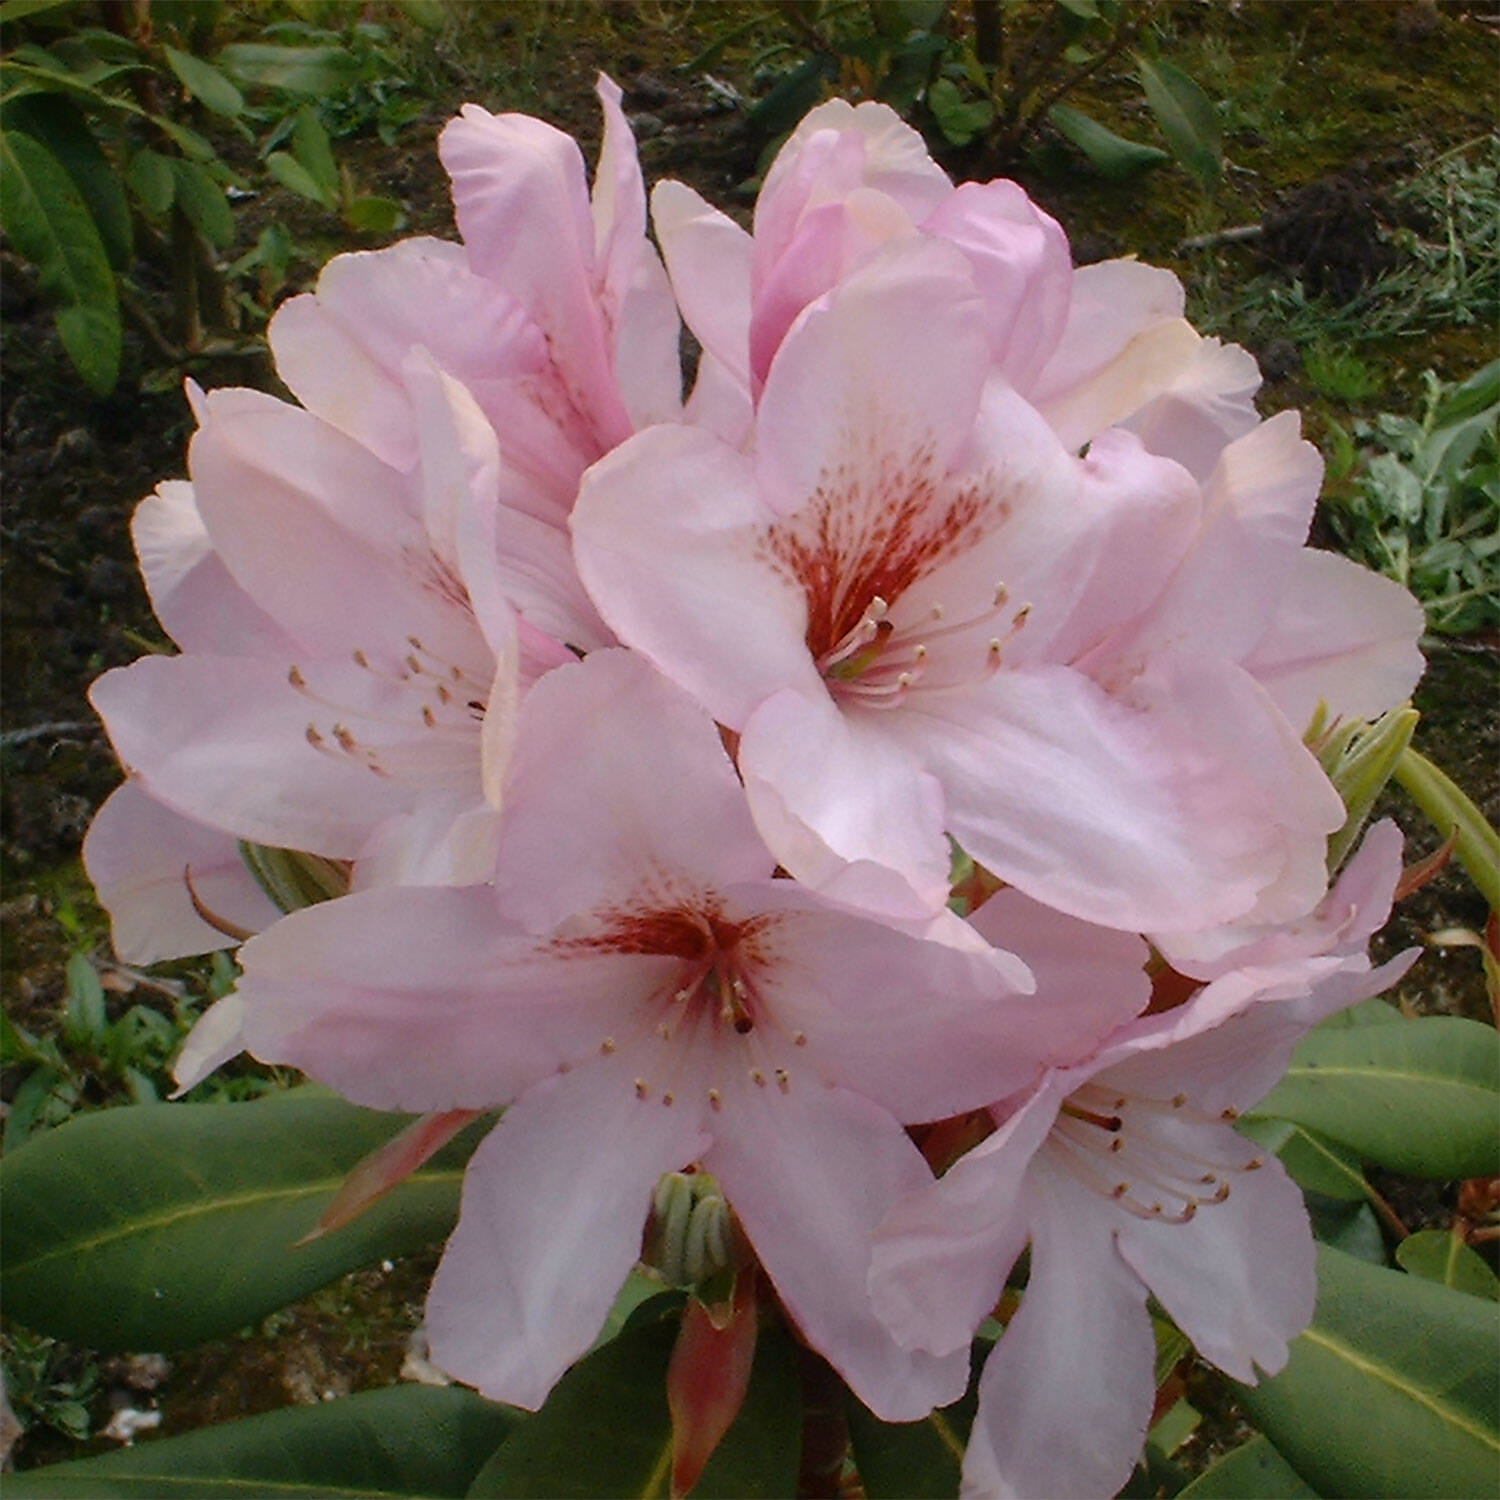 Kategorie <b>Hecken </b> - Rhododendron 'Paola' - Rhododendron Hybride 'Paola'